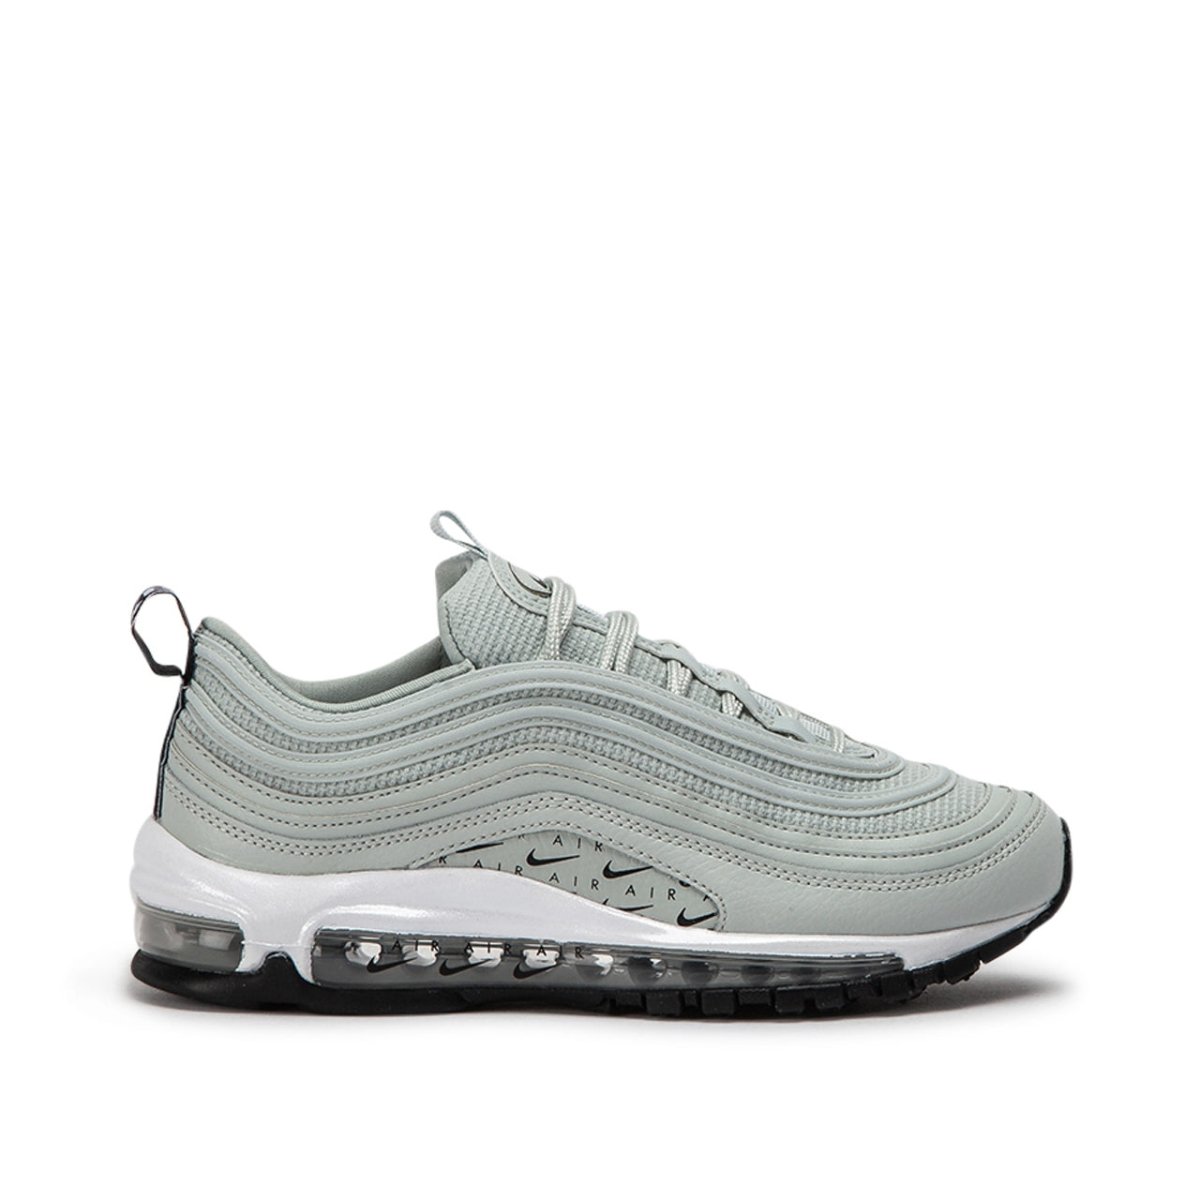 Nike WMNS Air Max 97 Lux (Silber)  - Allike Store